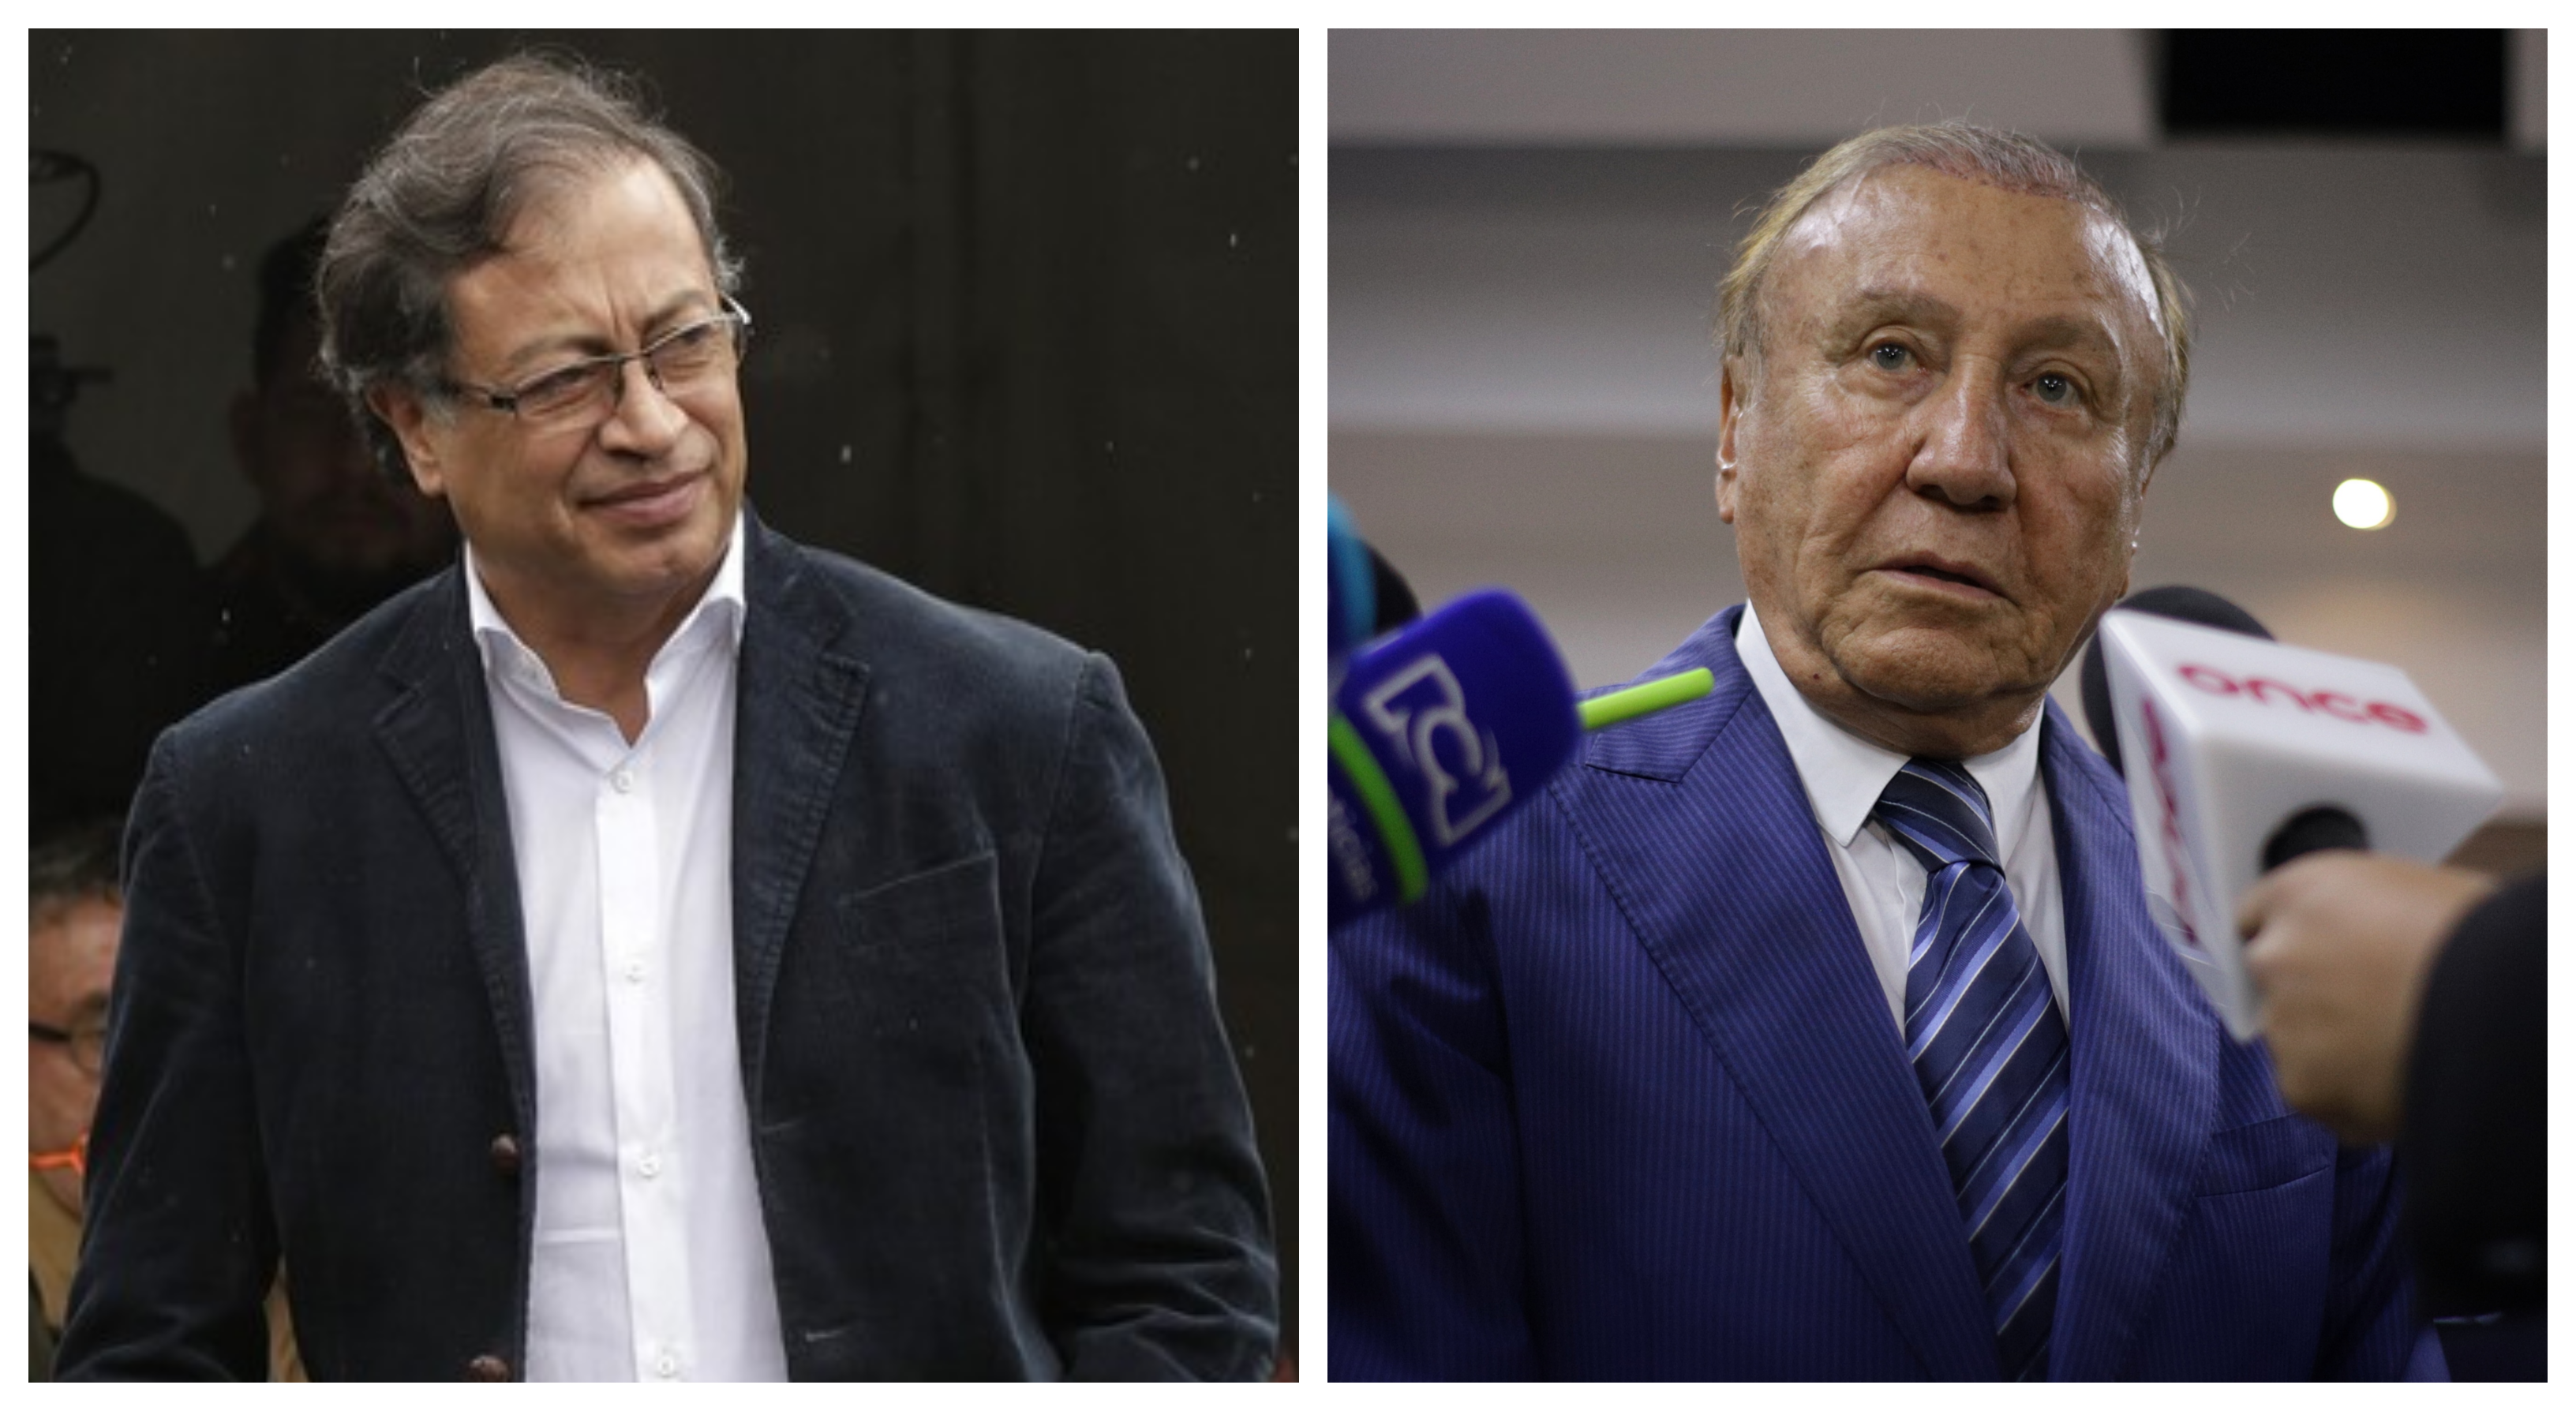 The candidates Gustavo Petro (Historic Pact) and Rodolfo Hernández (League of Anticorruption Leaders) were chosen by the Colombian electorate to contest, in the second round, the Presidency of Colombia.  PHOTOS: Colprensa